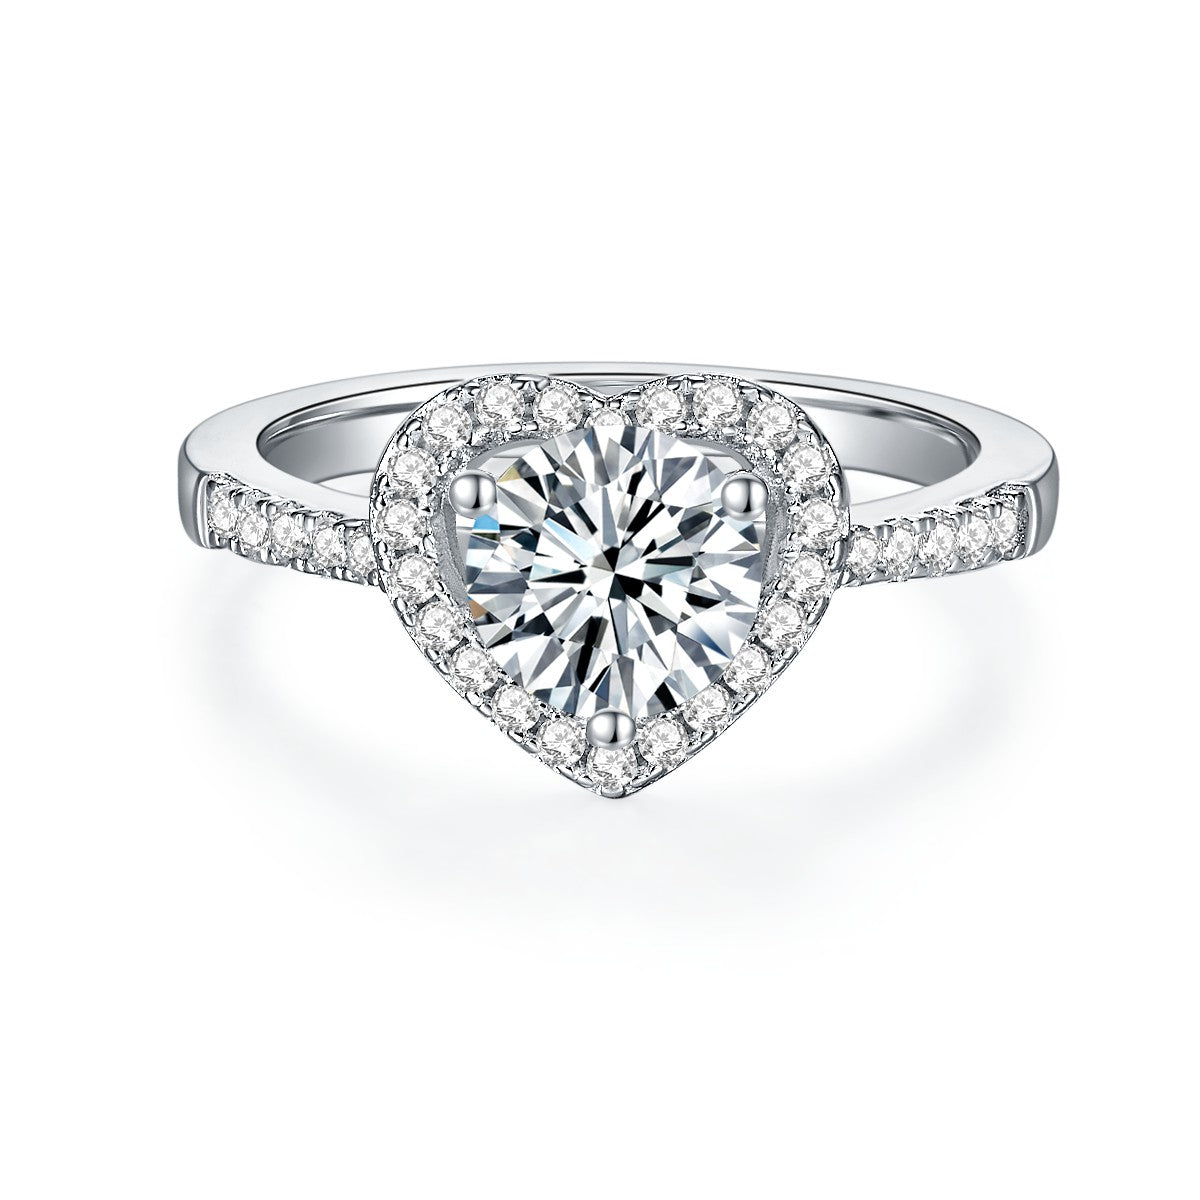 RM1012  S925 Moissanite Diamond Fall in love at first sight Rings 1 Carat